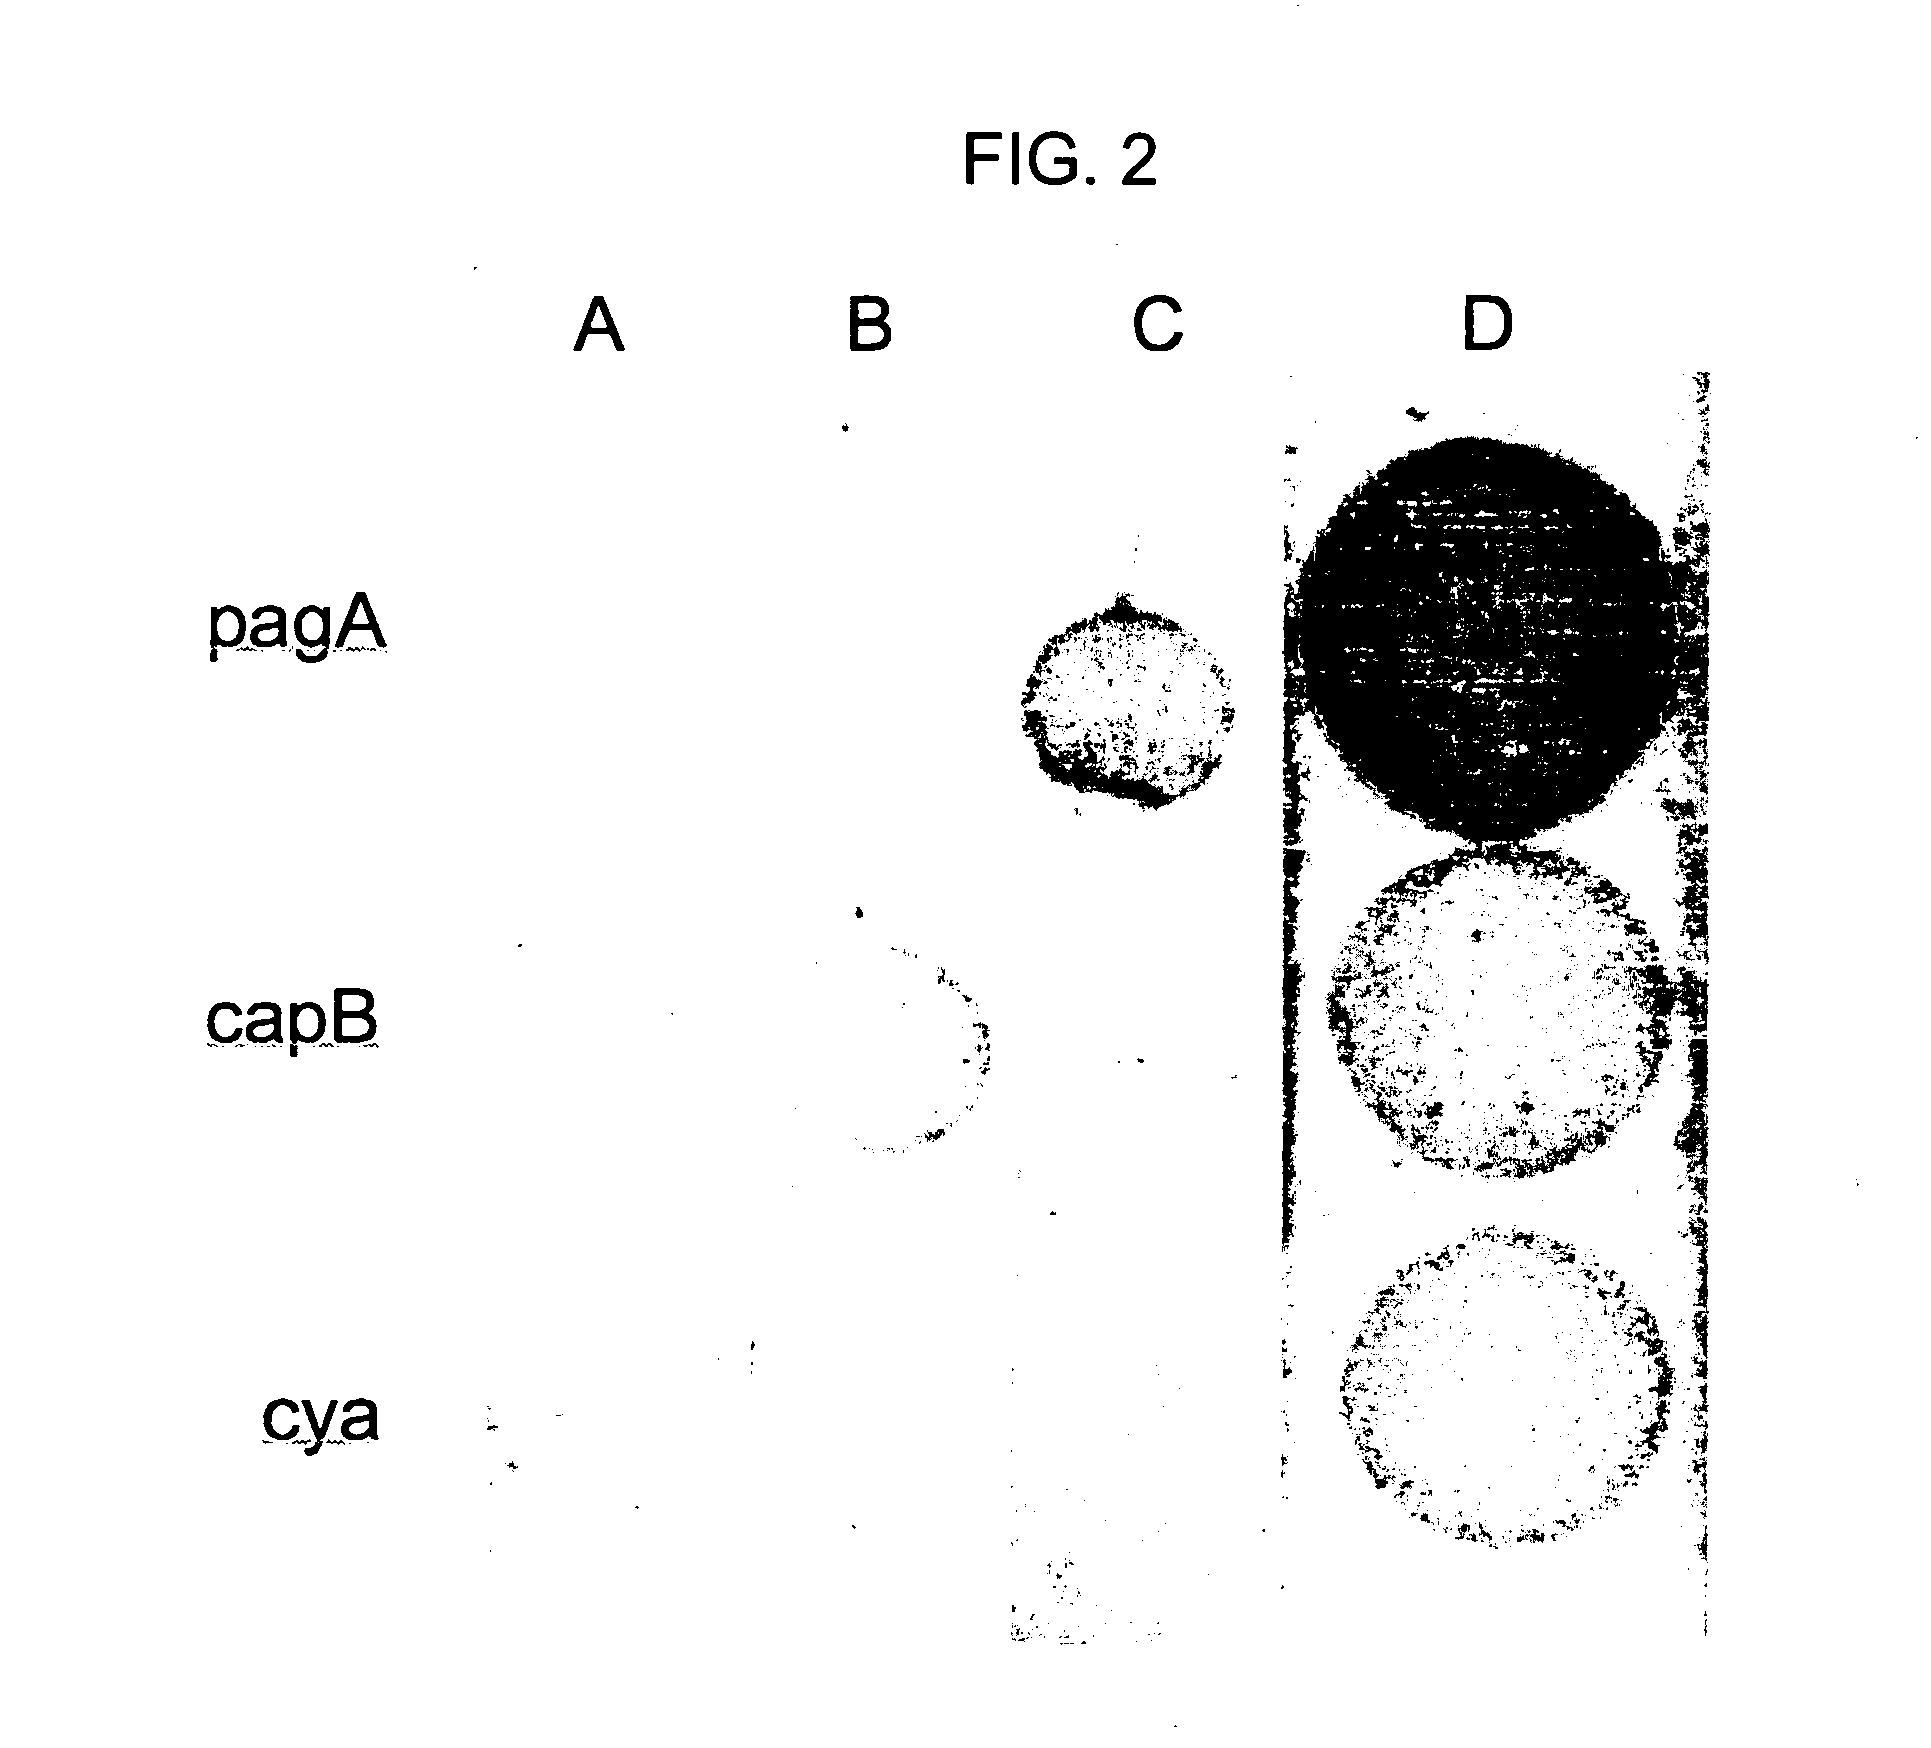 Miniaturized lateral flow device for rapid and sensitive detection of proteins or nucleic acids